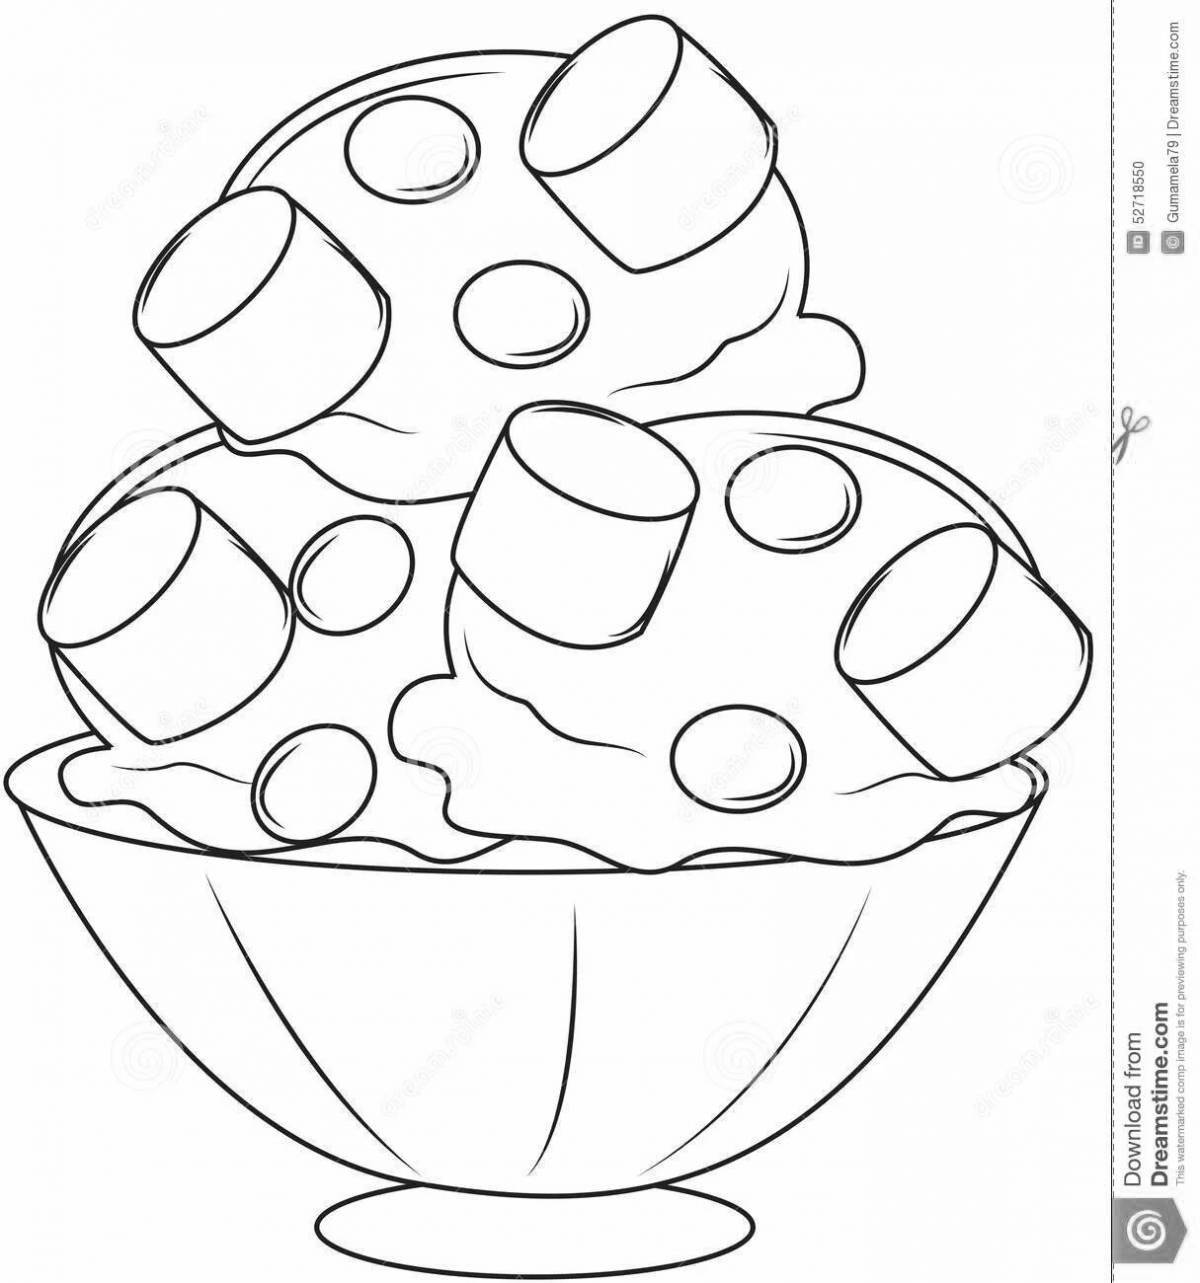 Marshmallow fat coloring page